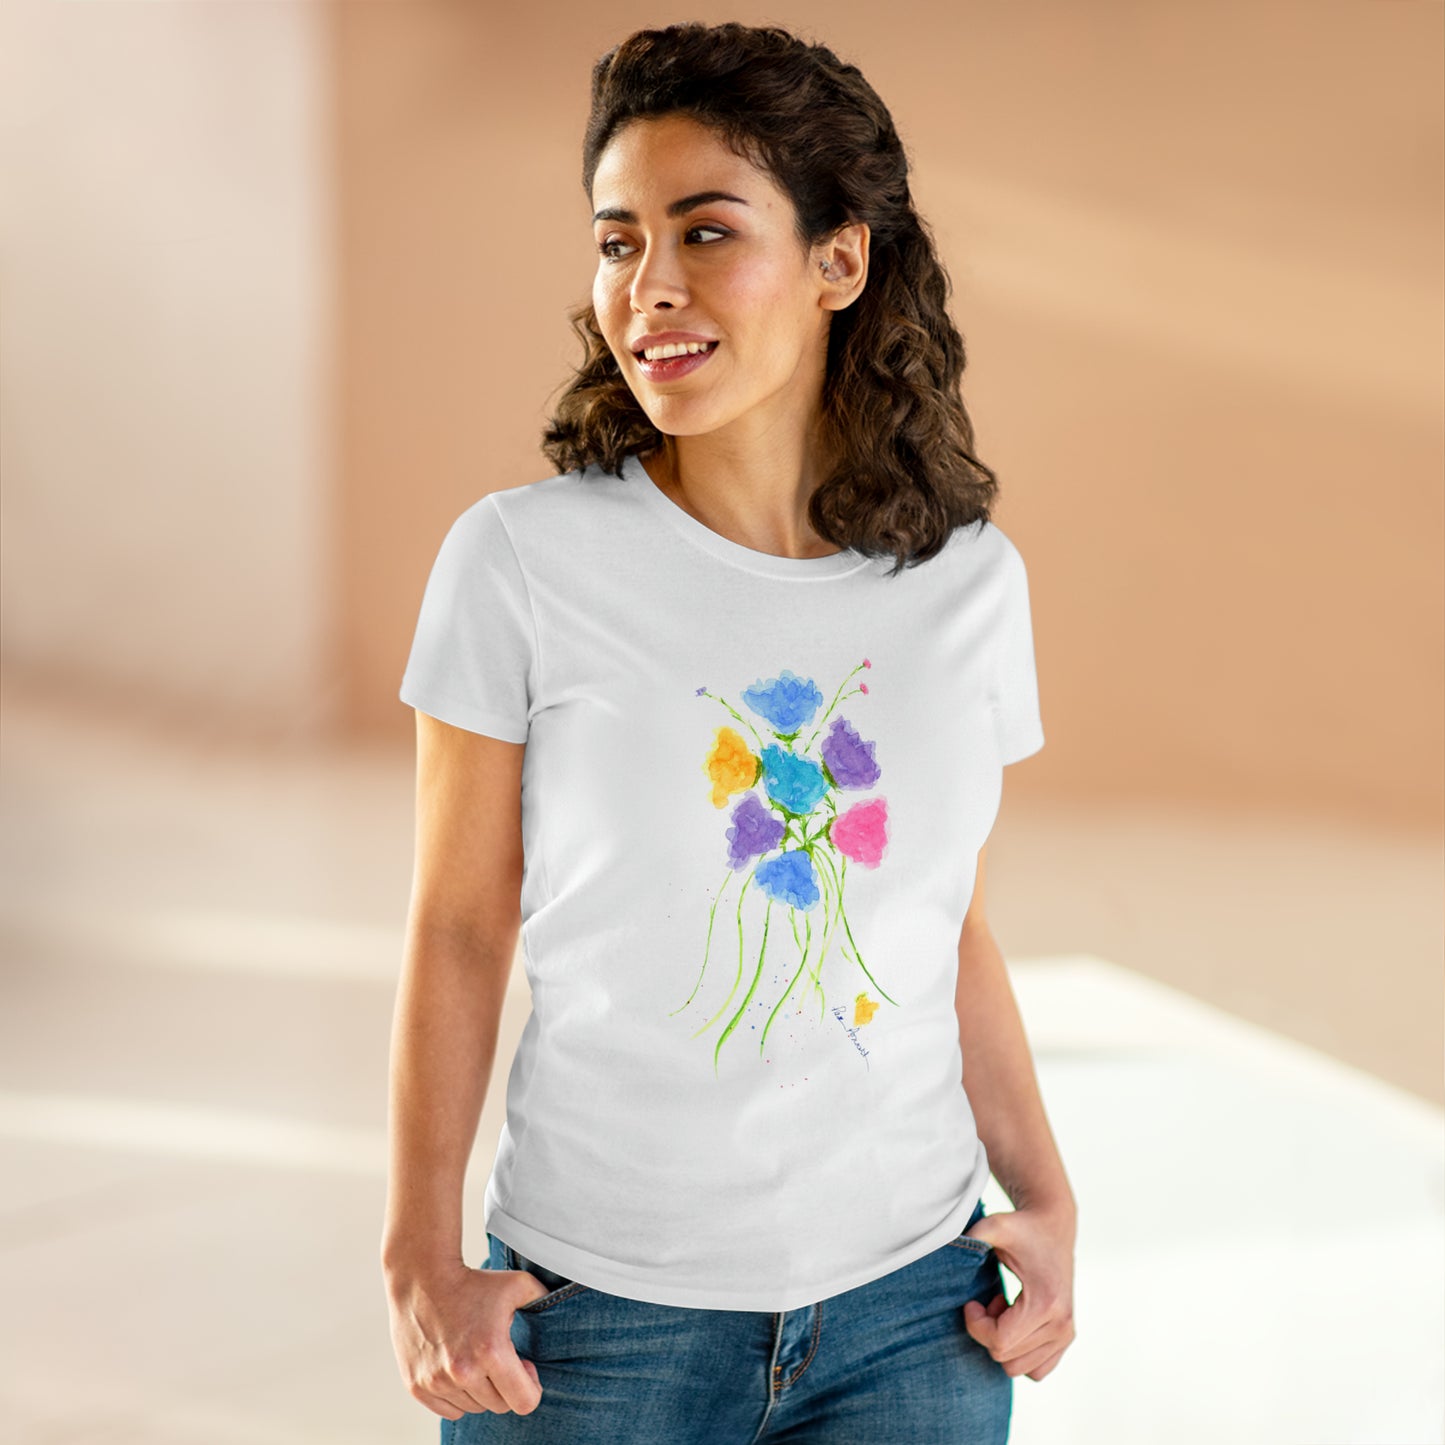 Mock up of a woman wearing the White t-shirt